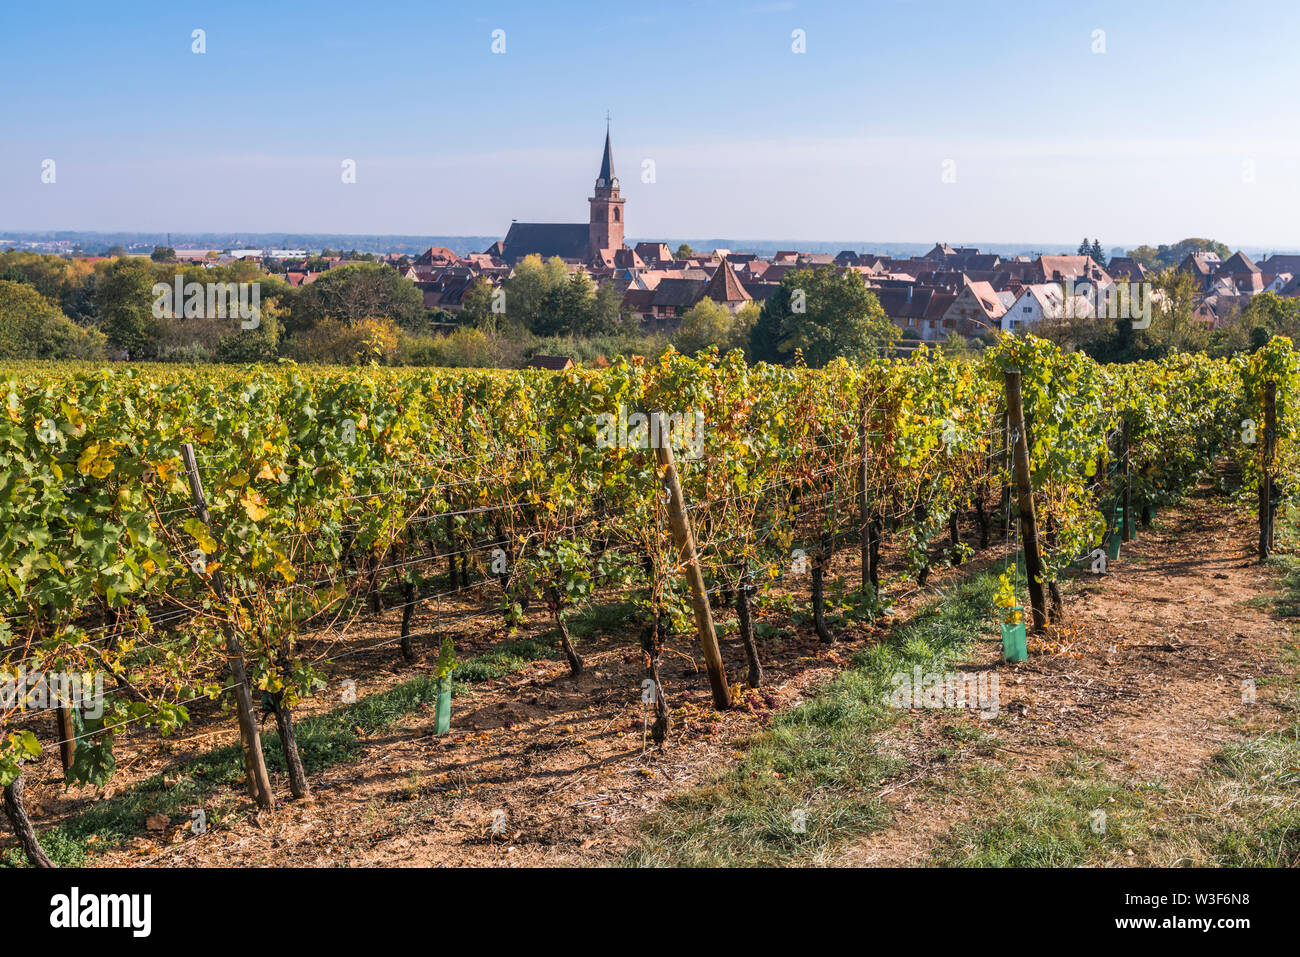 idyllic view of the village Bergheim, Alsace Wine Route, France, rural landscape with vines Stock Photo